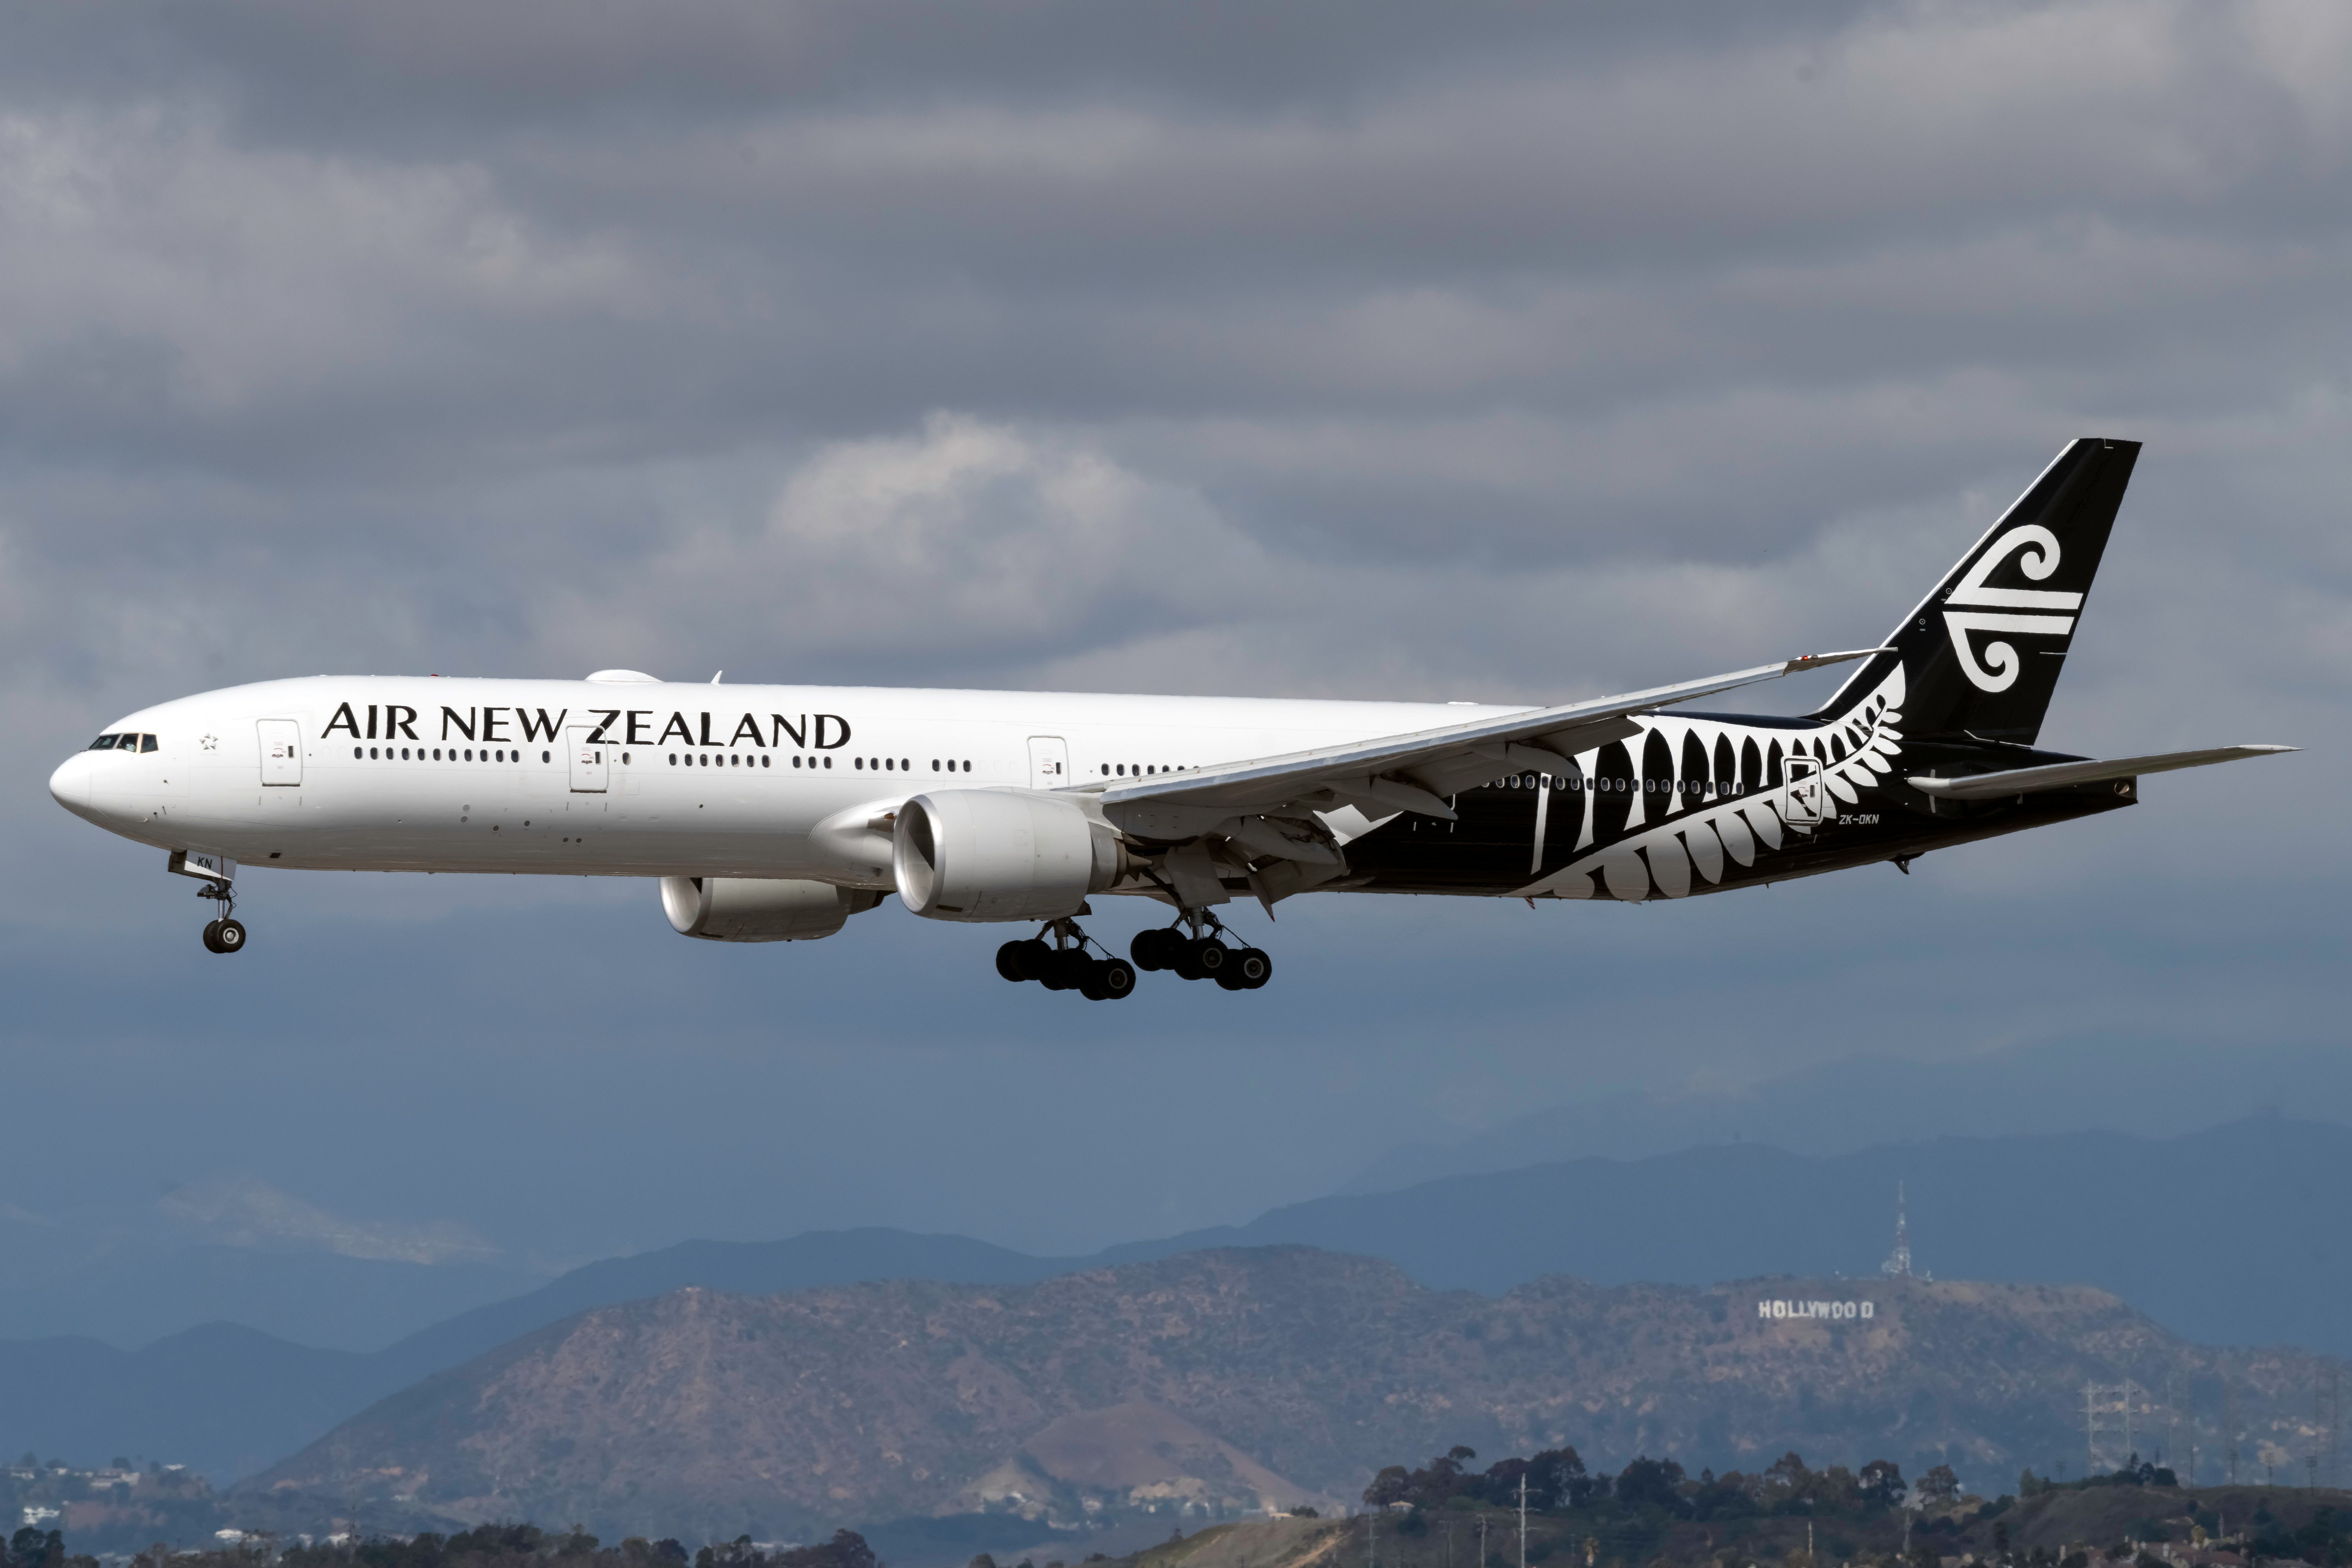 Air New Zealand Boeing 777-319 landing against cloudy sky